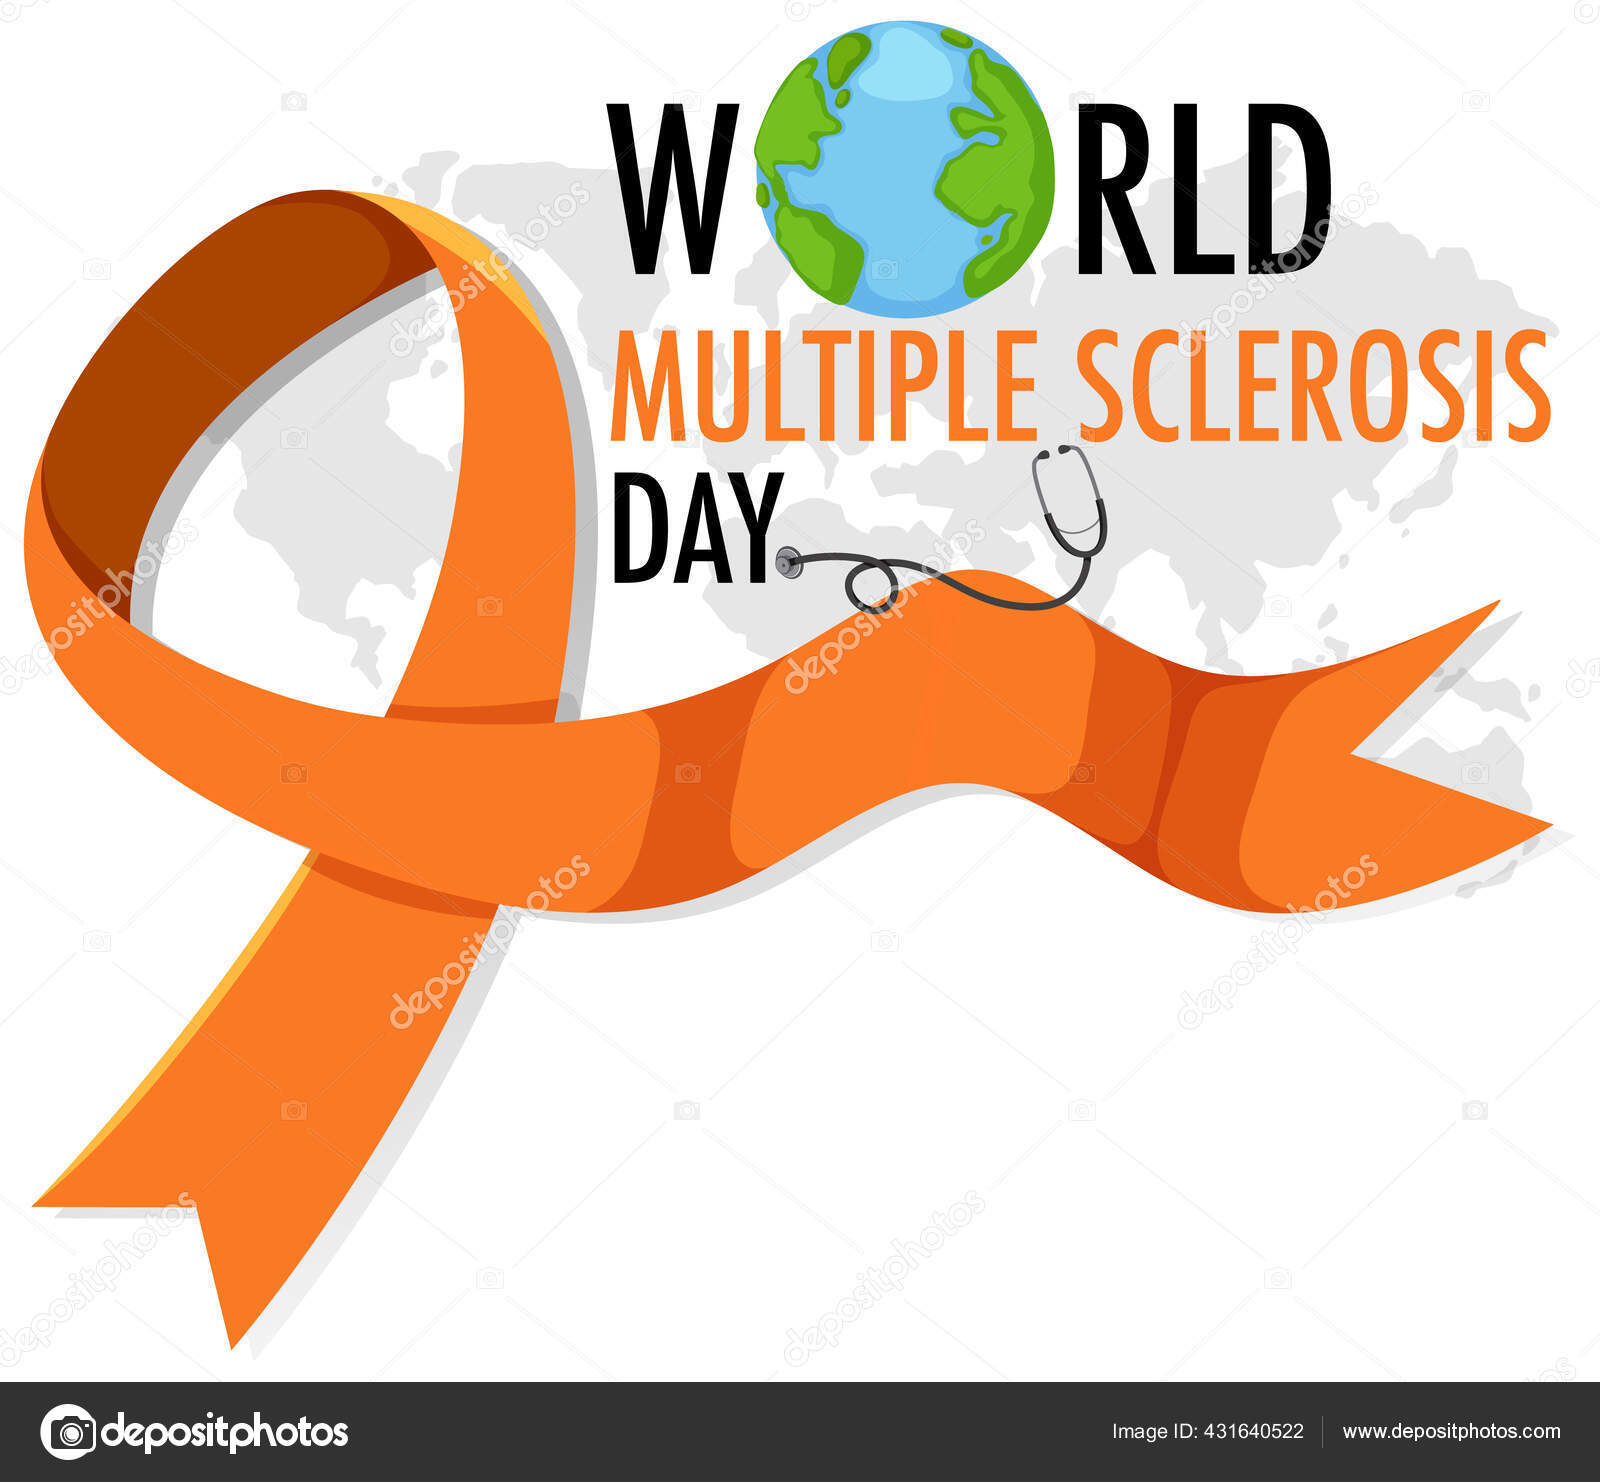 Multiple Sclerosis Day. World MS Day design with orange ribbon